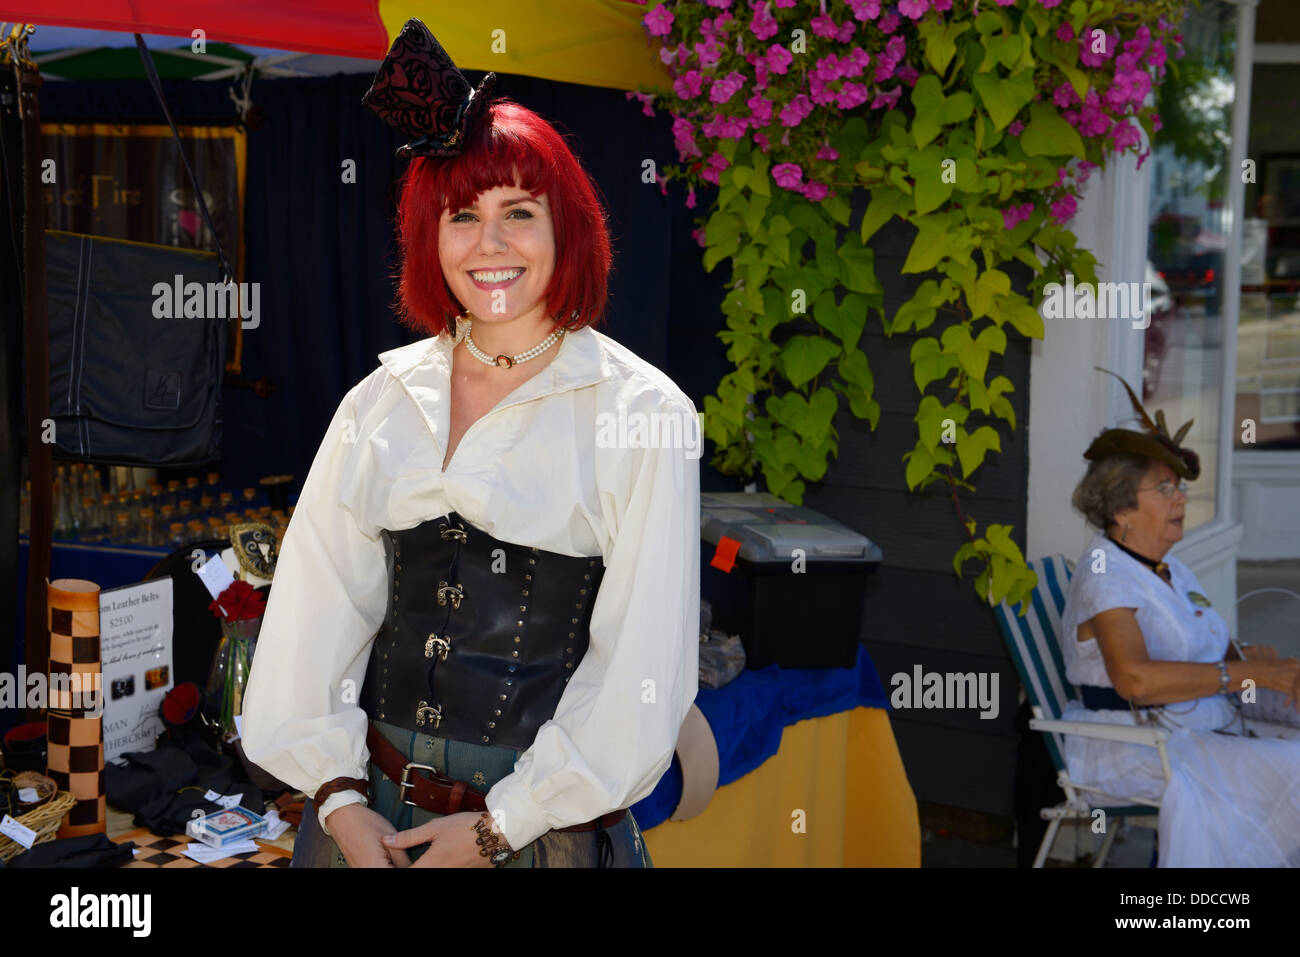 Pretty young woman with red hair dressed up for the steampunk festival in Coldwater Ontario Stock Photo